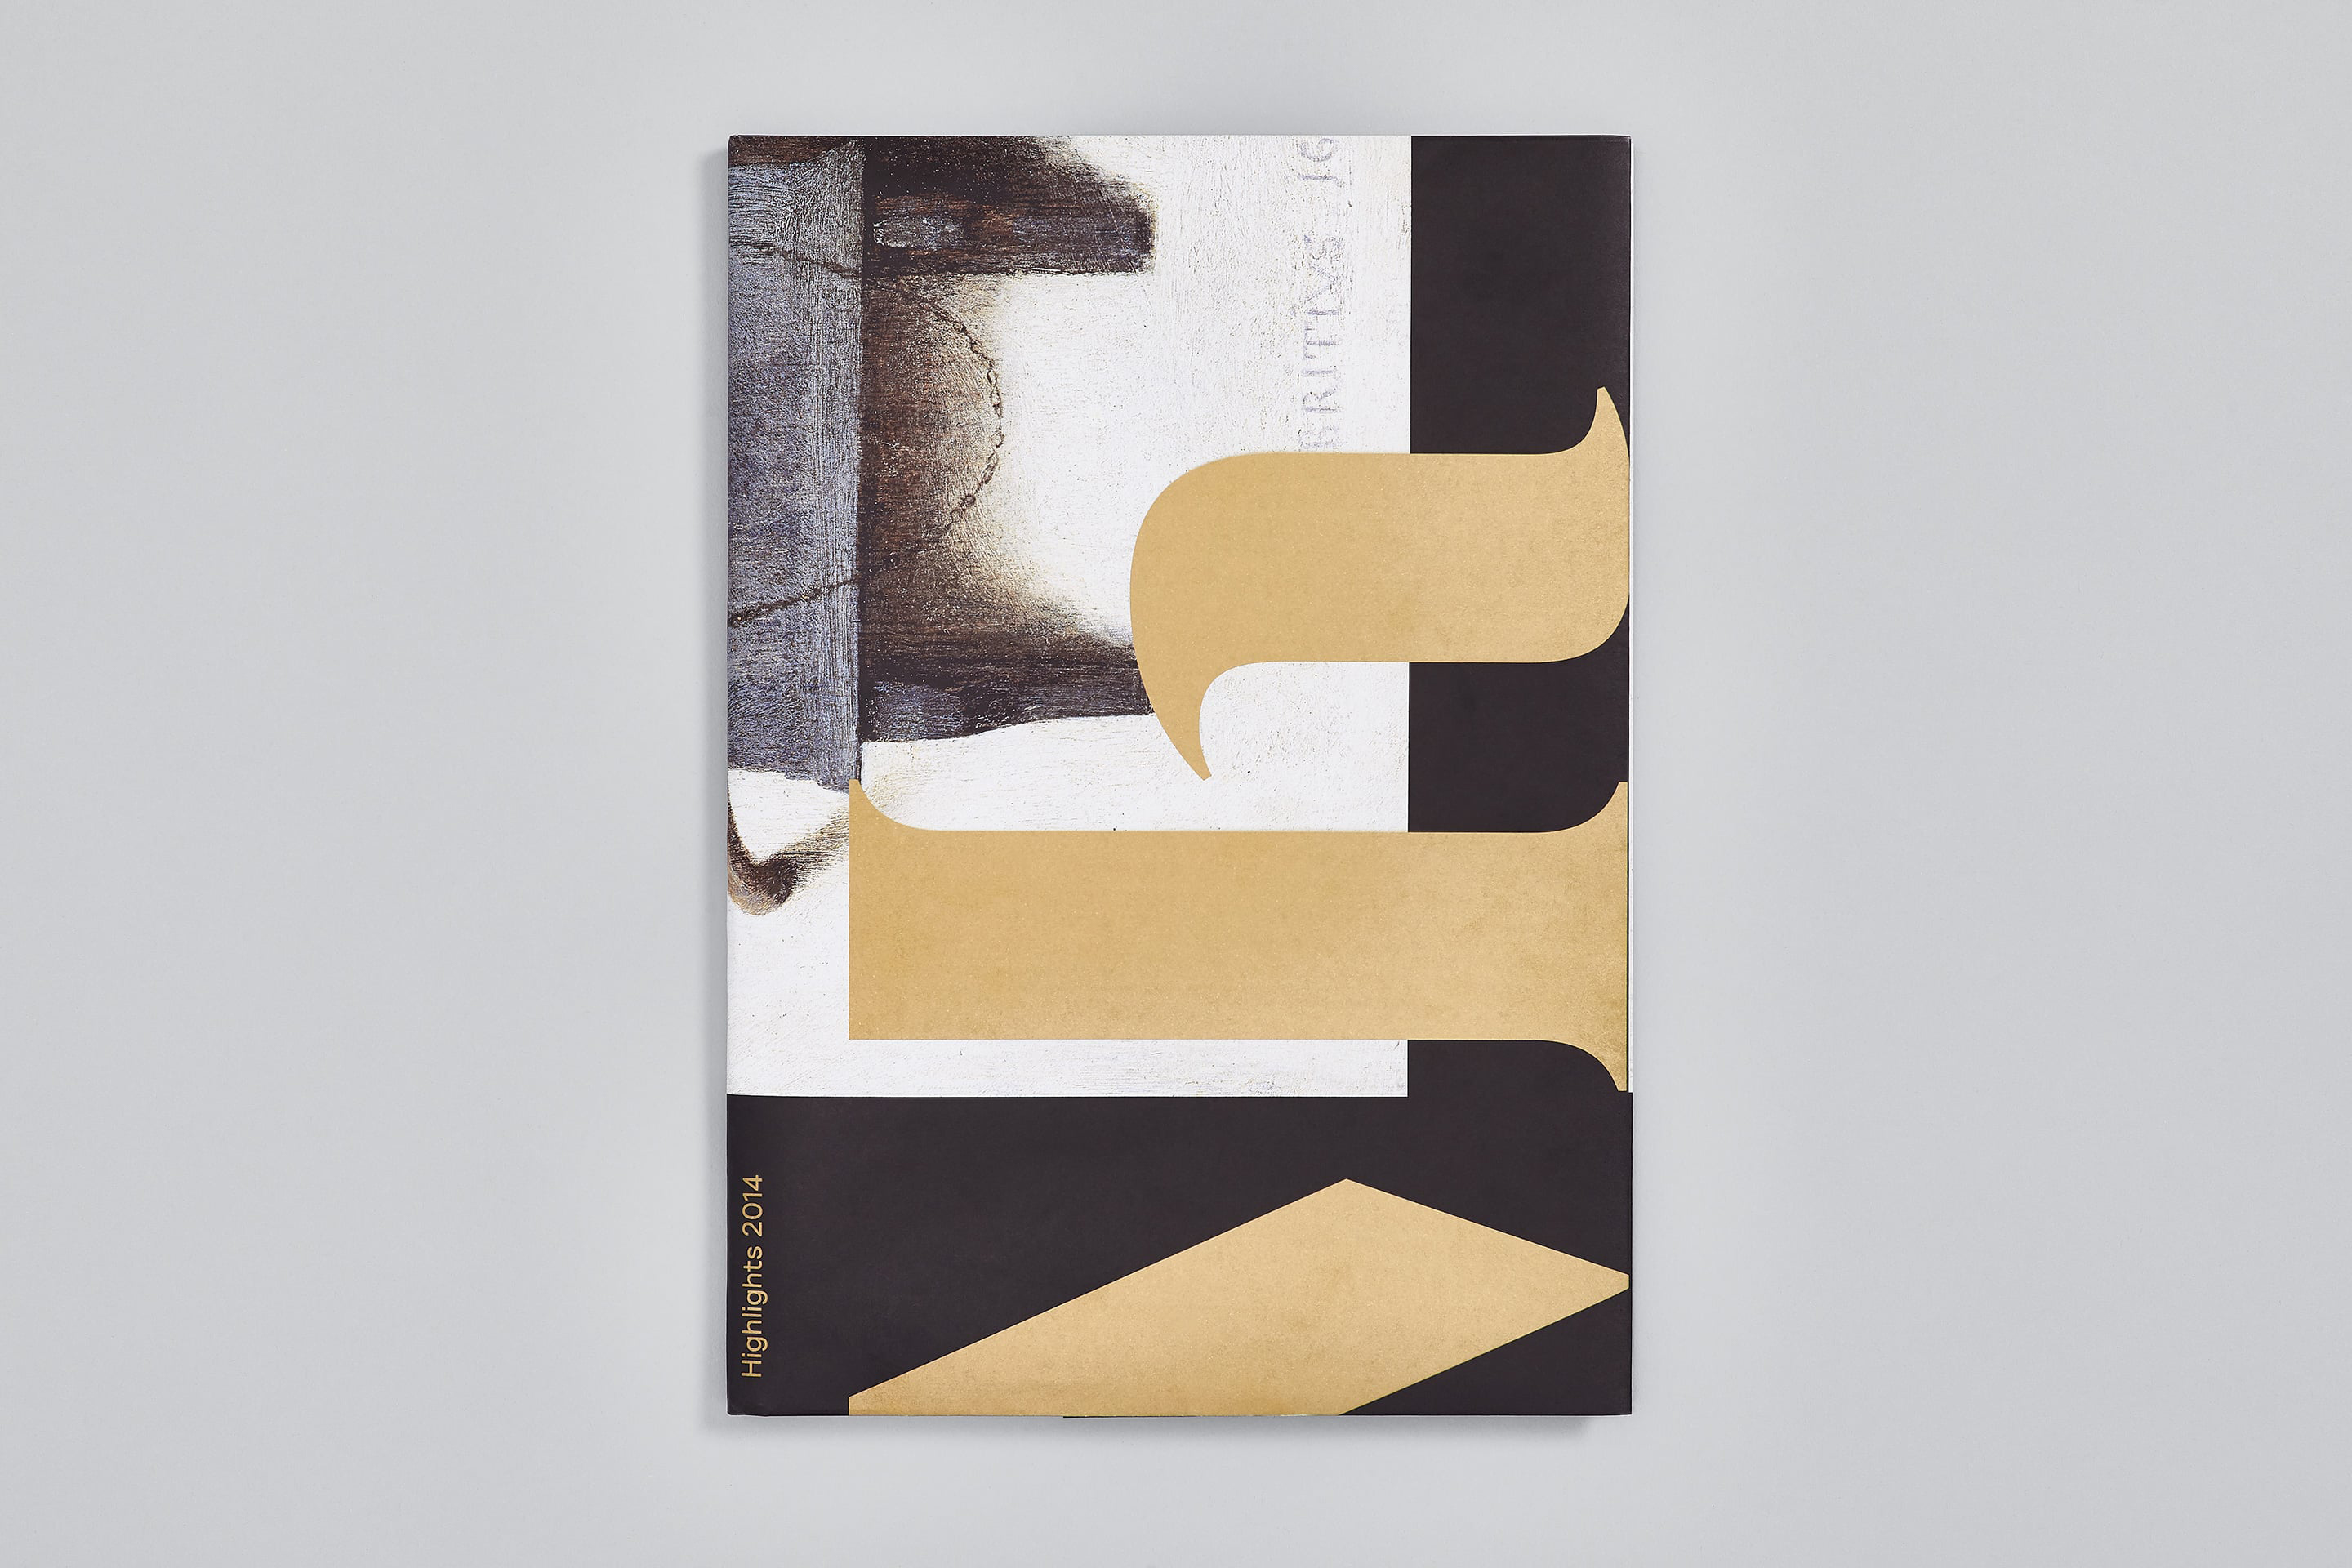 Poster and brand identity designed by Dumbar for Mauritshuis